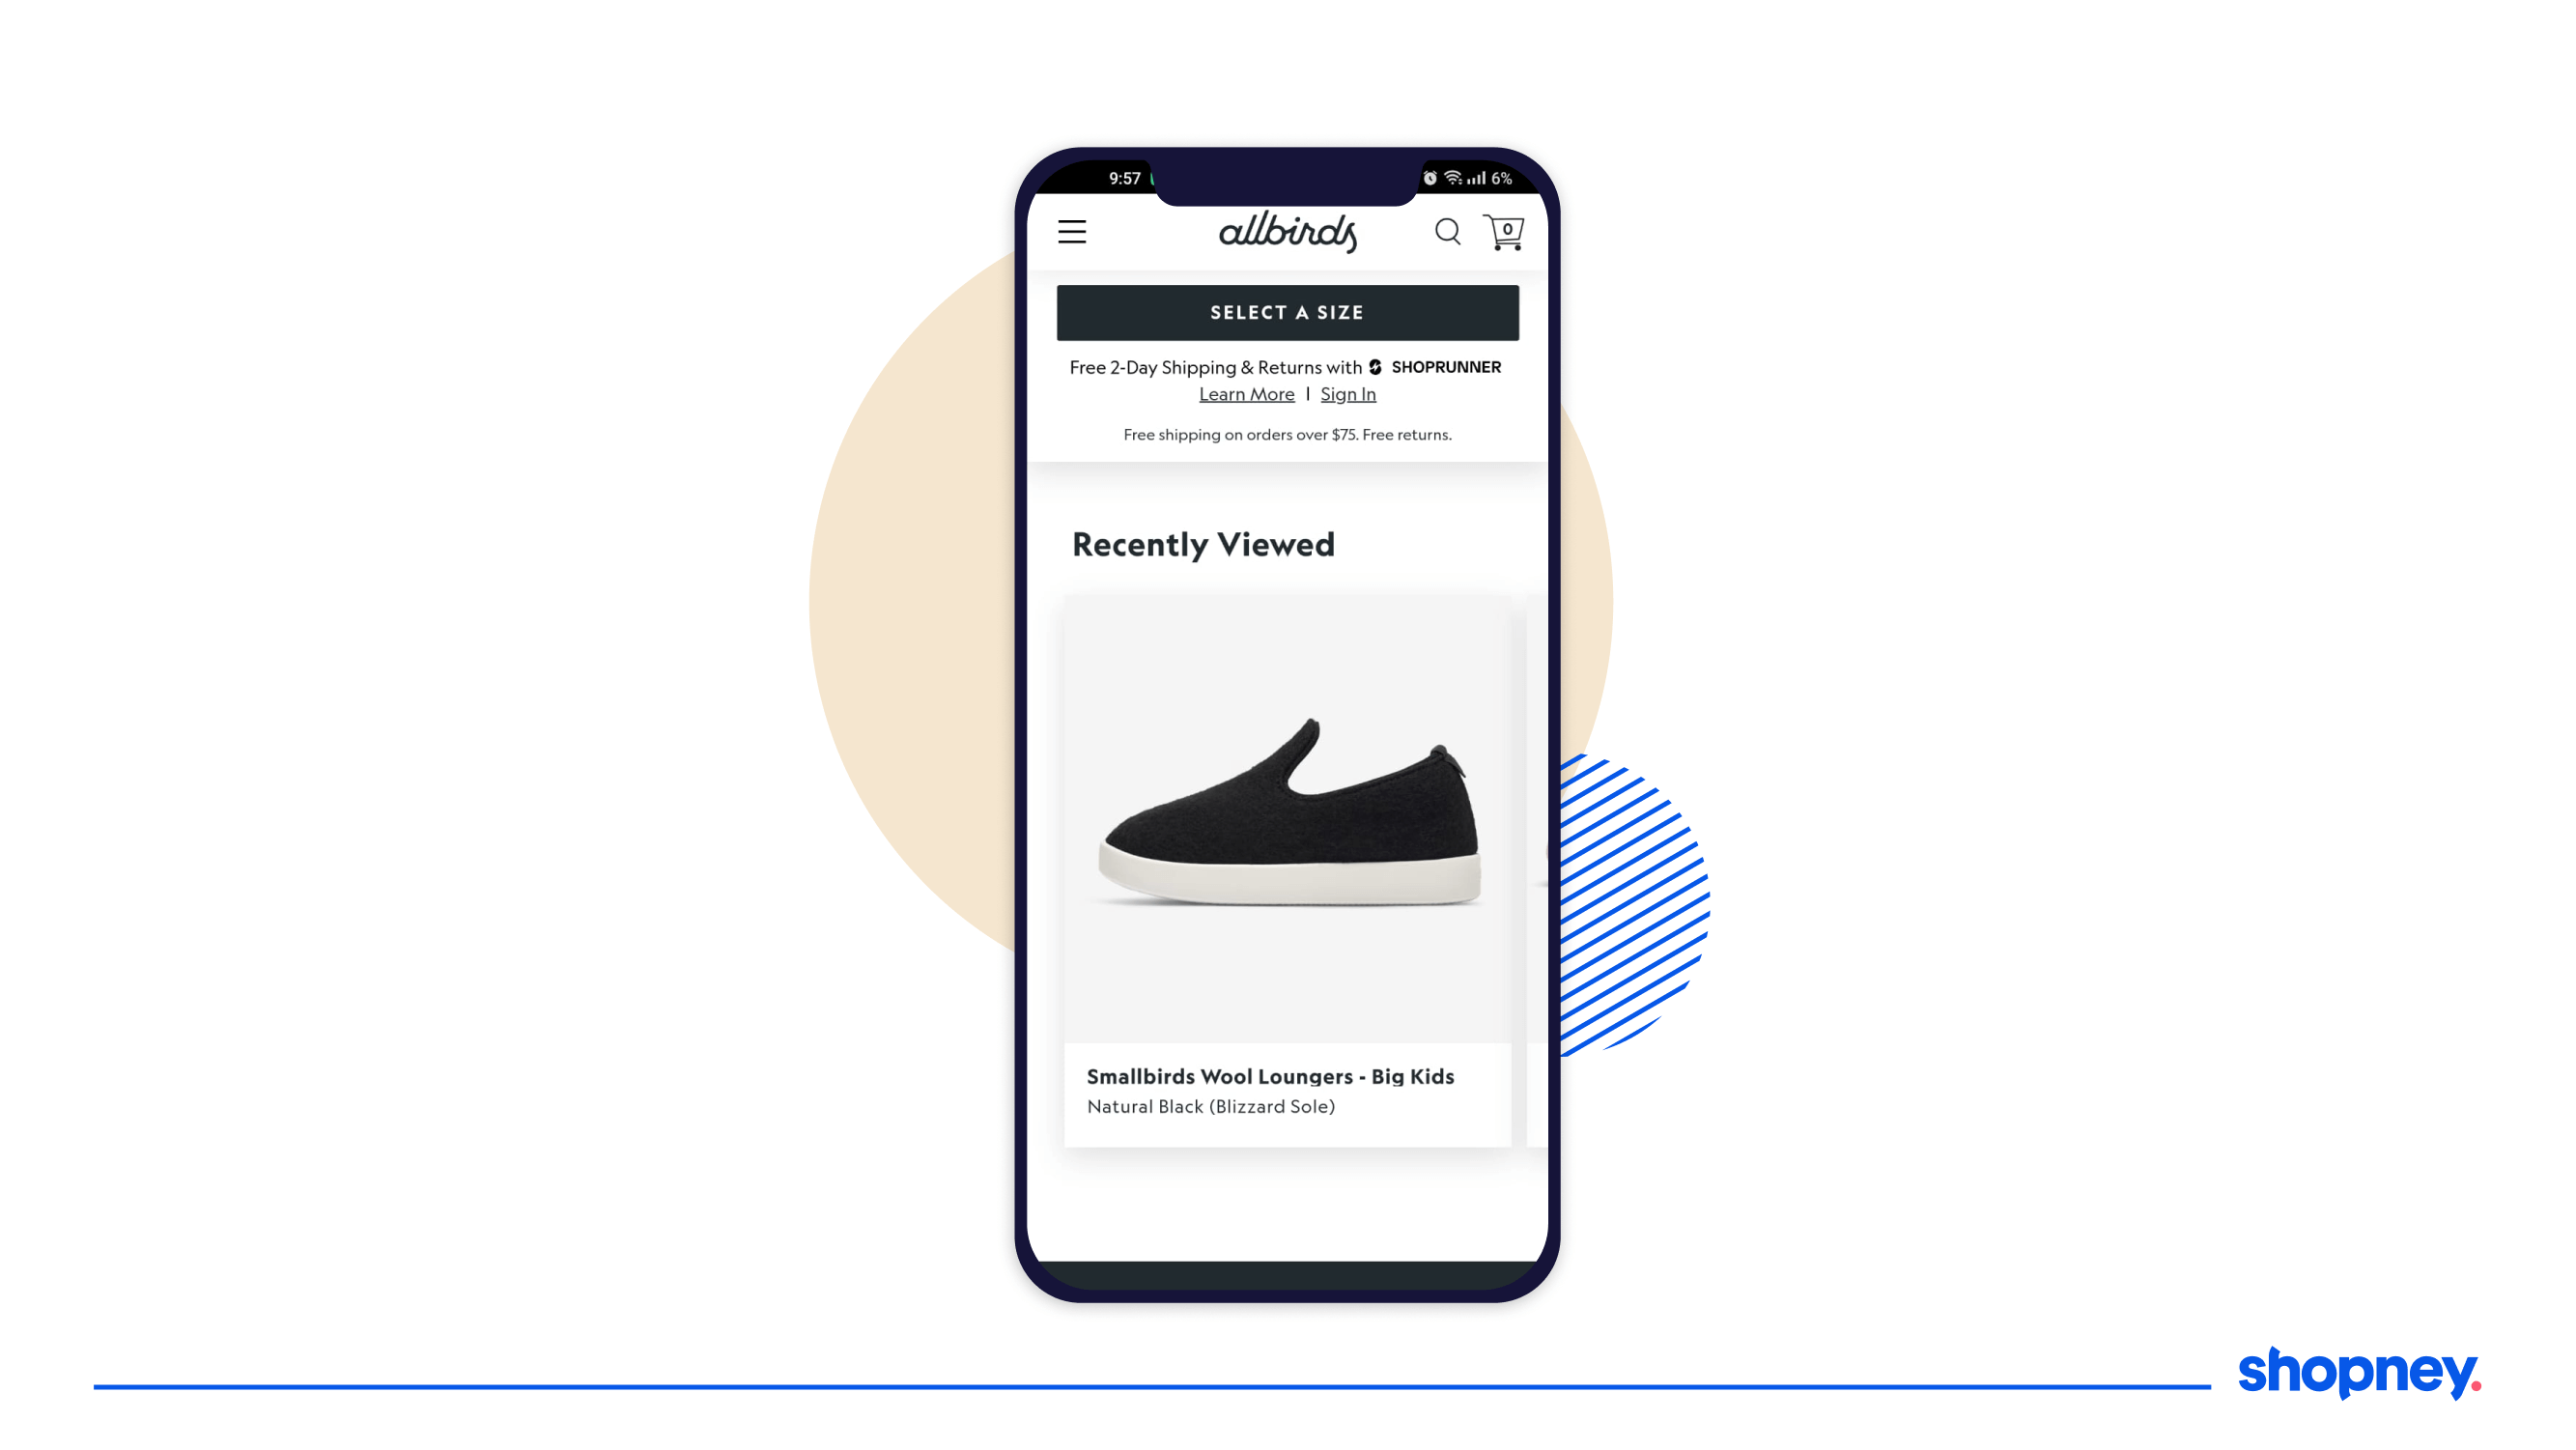 Recently viewed section of Allbirds mobile app